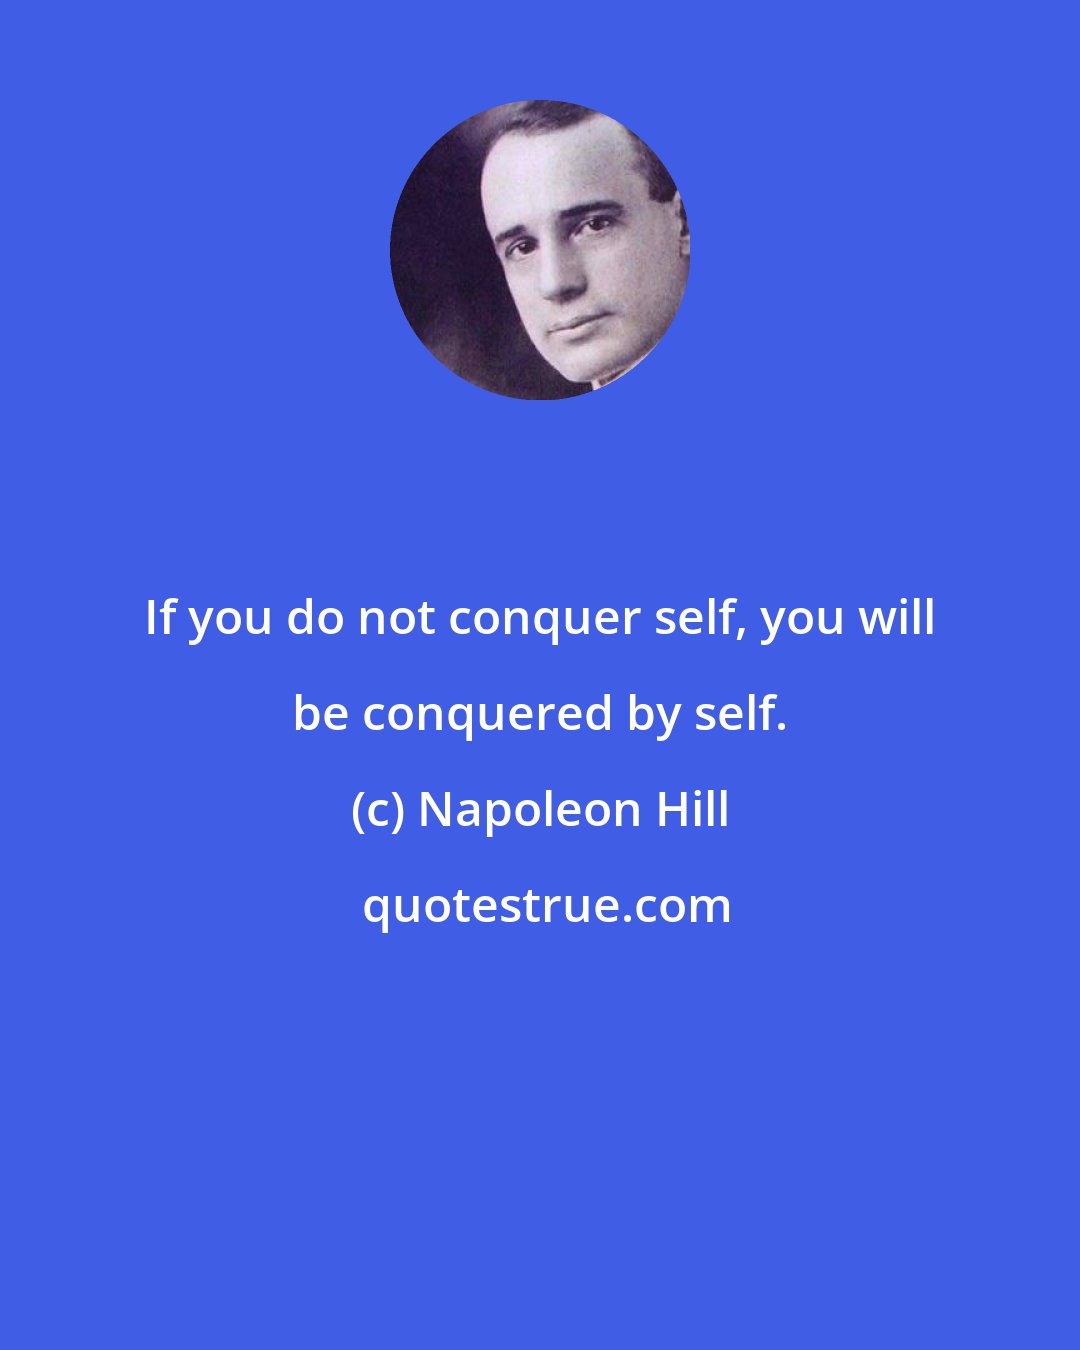 Napoleon Hill: If you do not conquer self, you will be conquered by self.